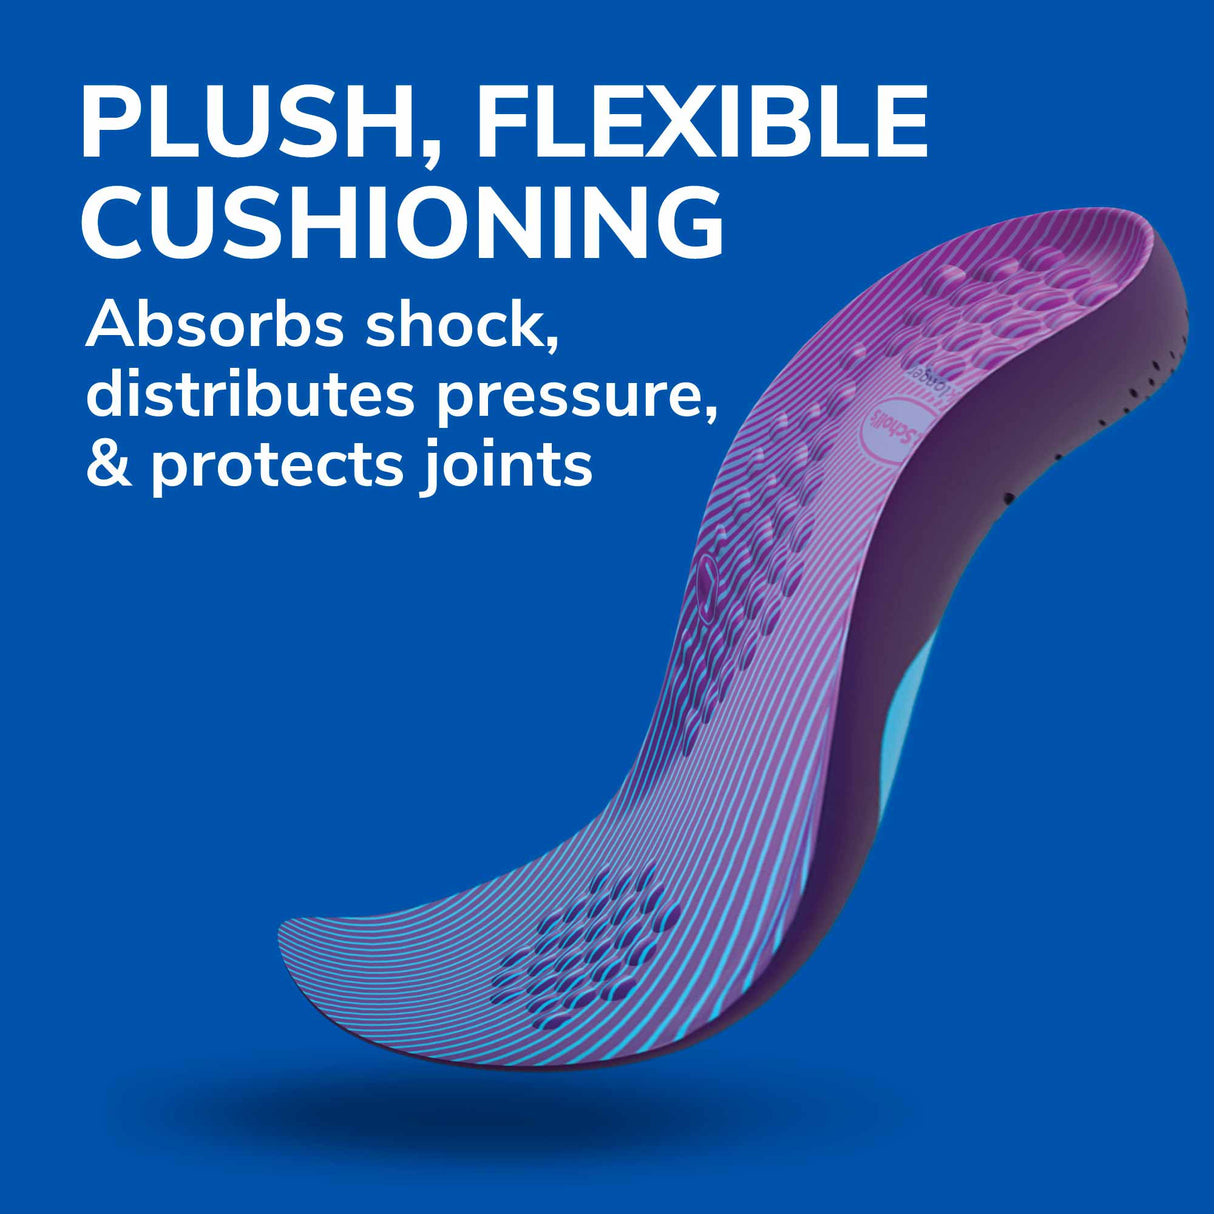 image of plus, flexible cushioning absorbs shock, distributes pressure, & protects joints